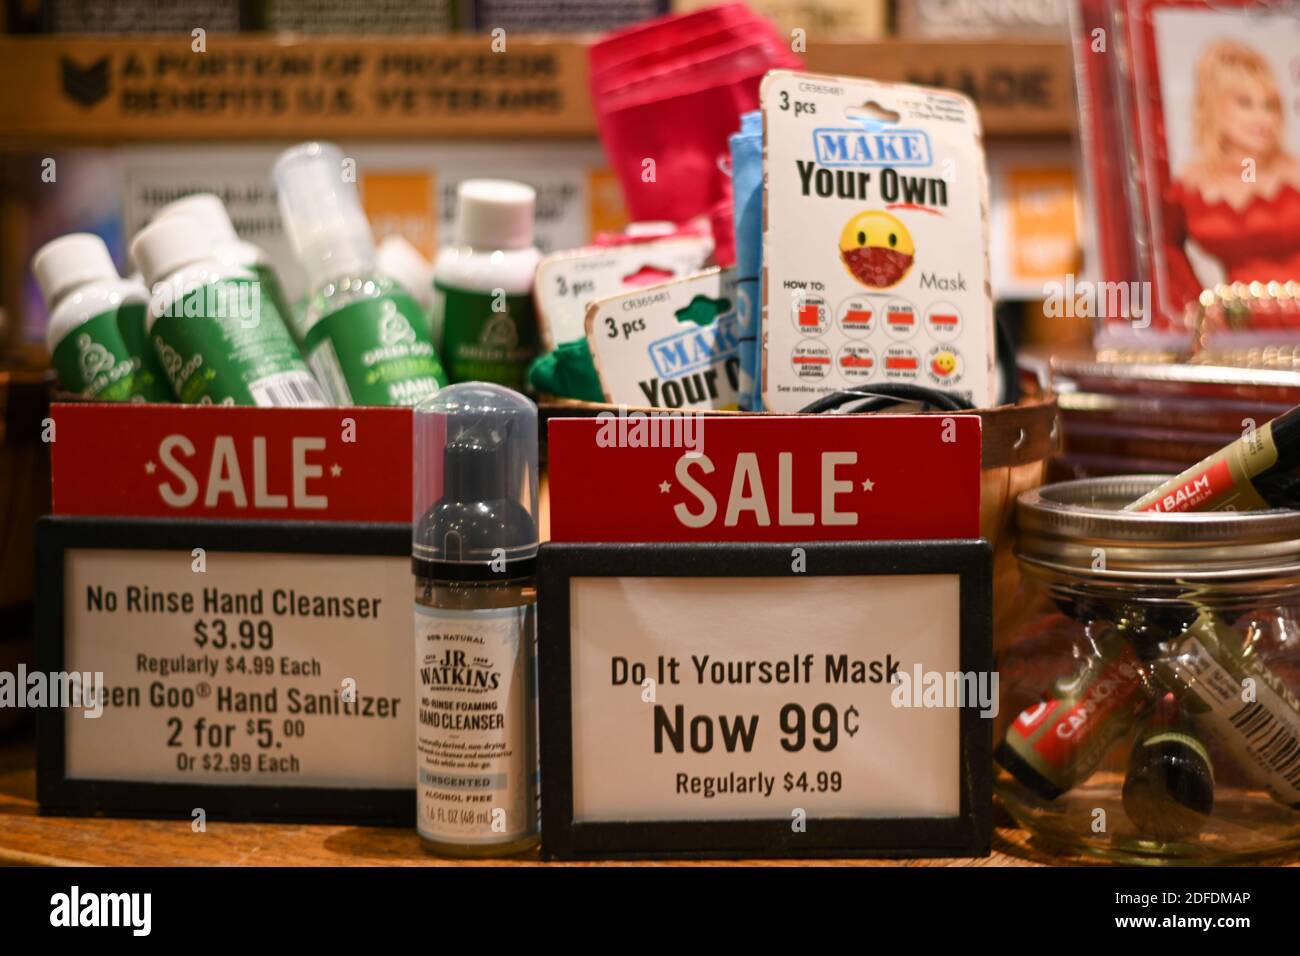 Detailed view personal protective equipment sold inside Cracker Barrel Old Country Store attempting to help curve the novel coronavirus outbreak, Wedn Stock Photo